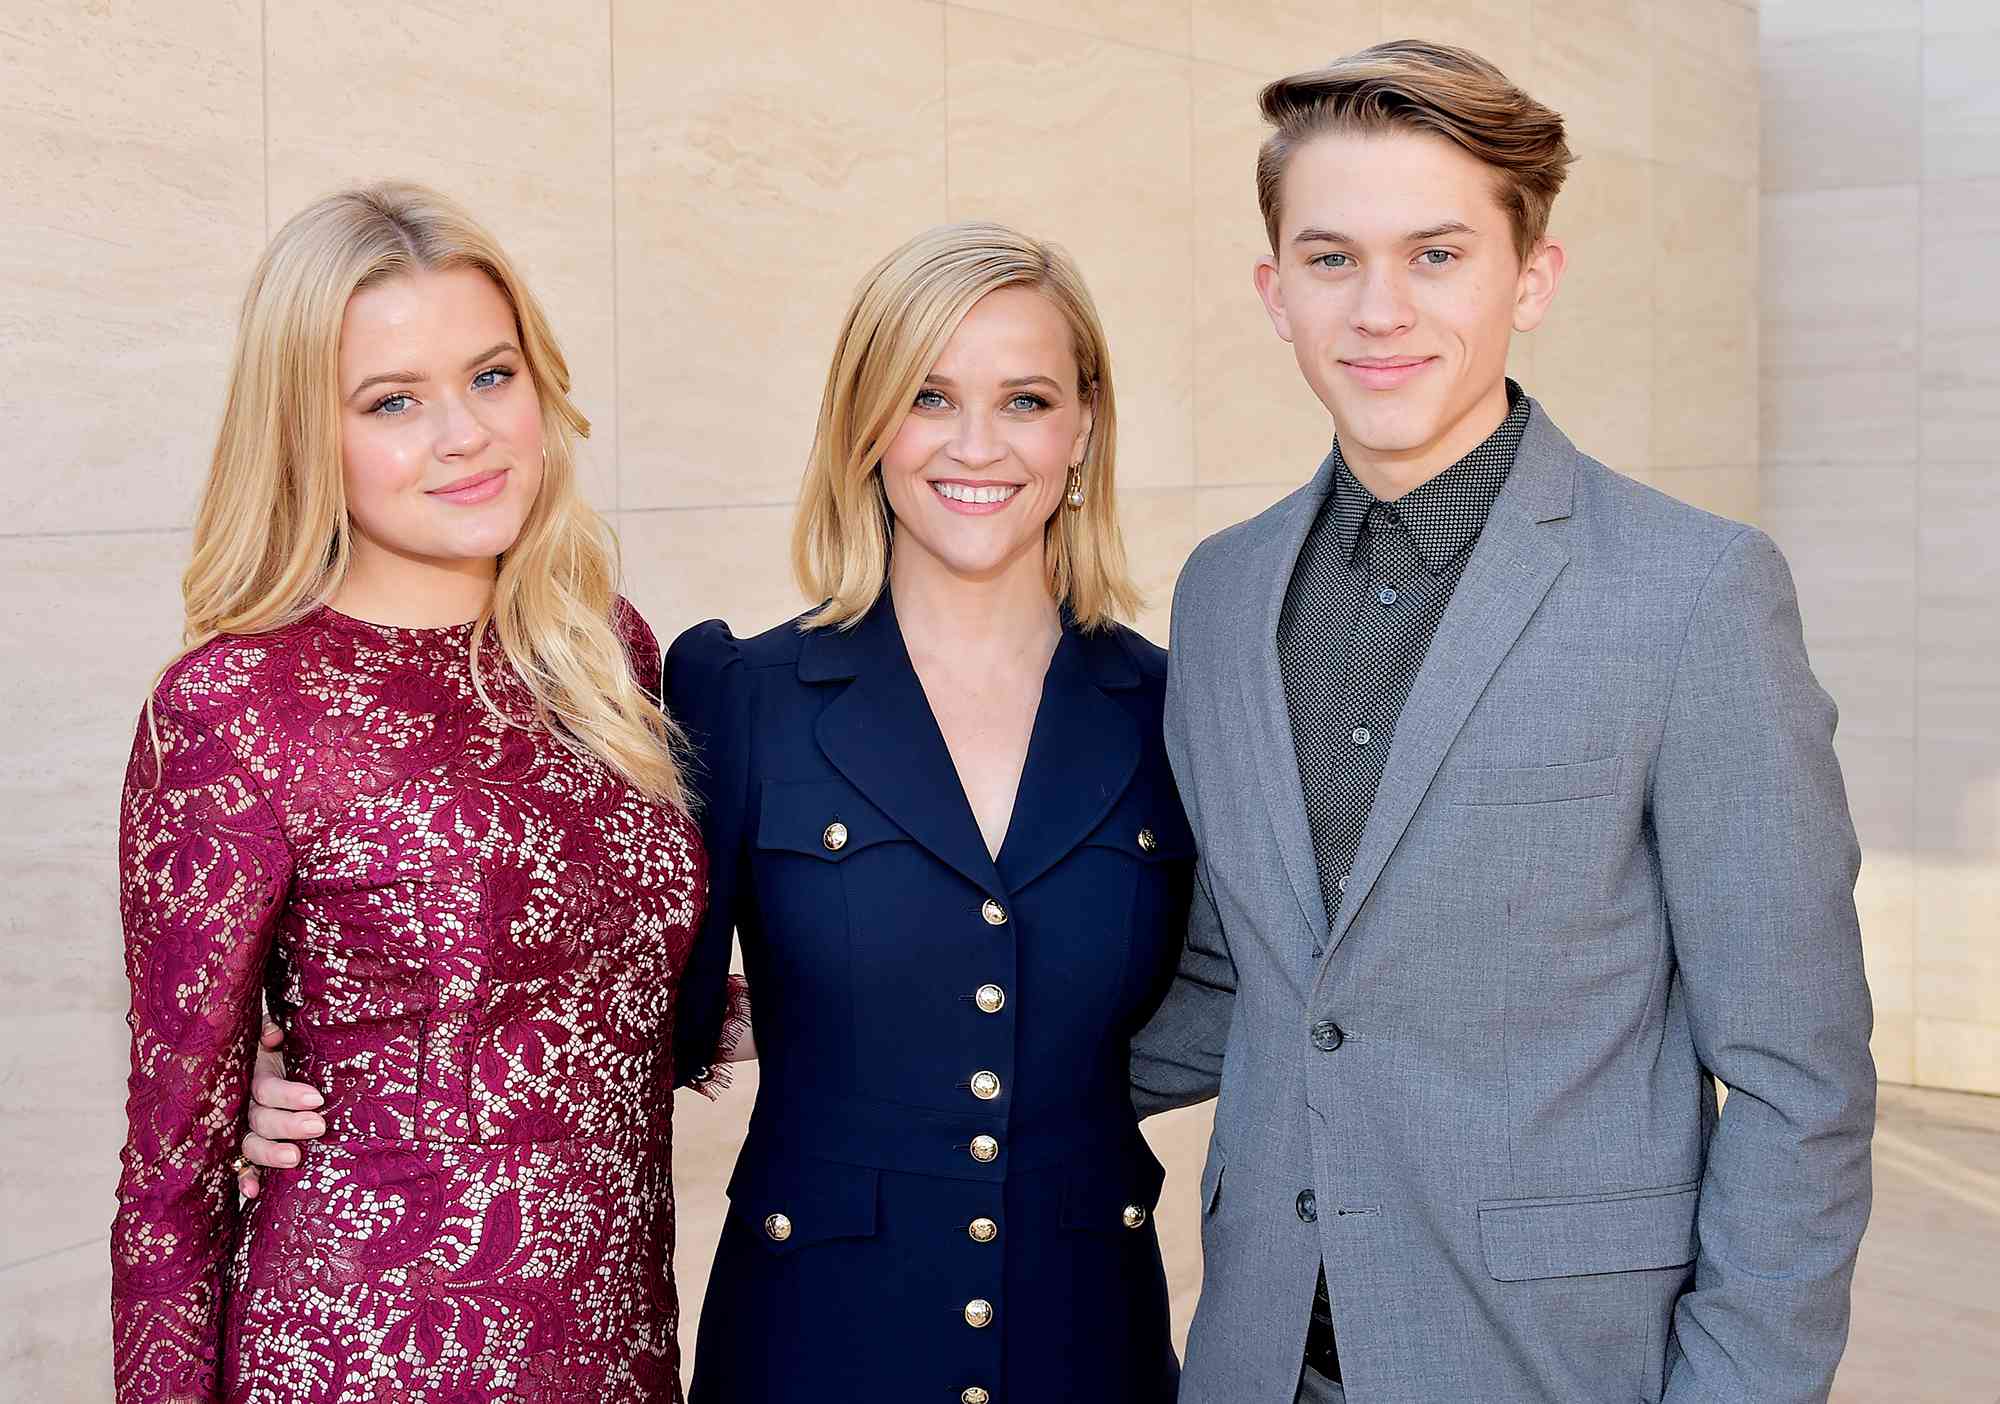 Ava Elizabeth Phillippe, honoree Reese Witherspoon, and Deacon Reese Phillippe attend The Hollywood Reporter's Power 100 Women in Entertainment at Milk Studios on December 11, 2019 in Hollywood, California